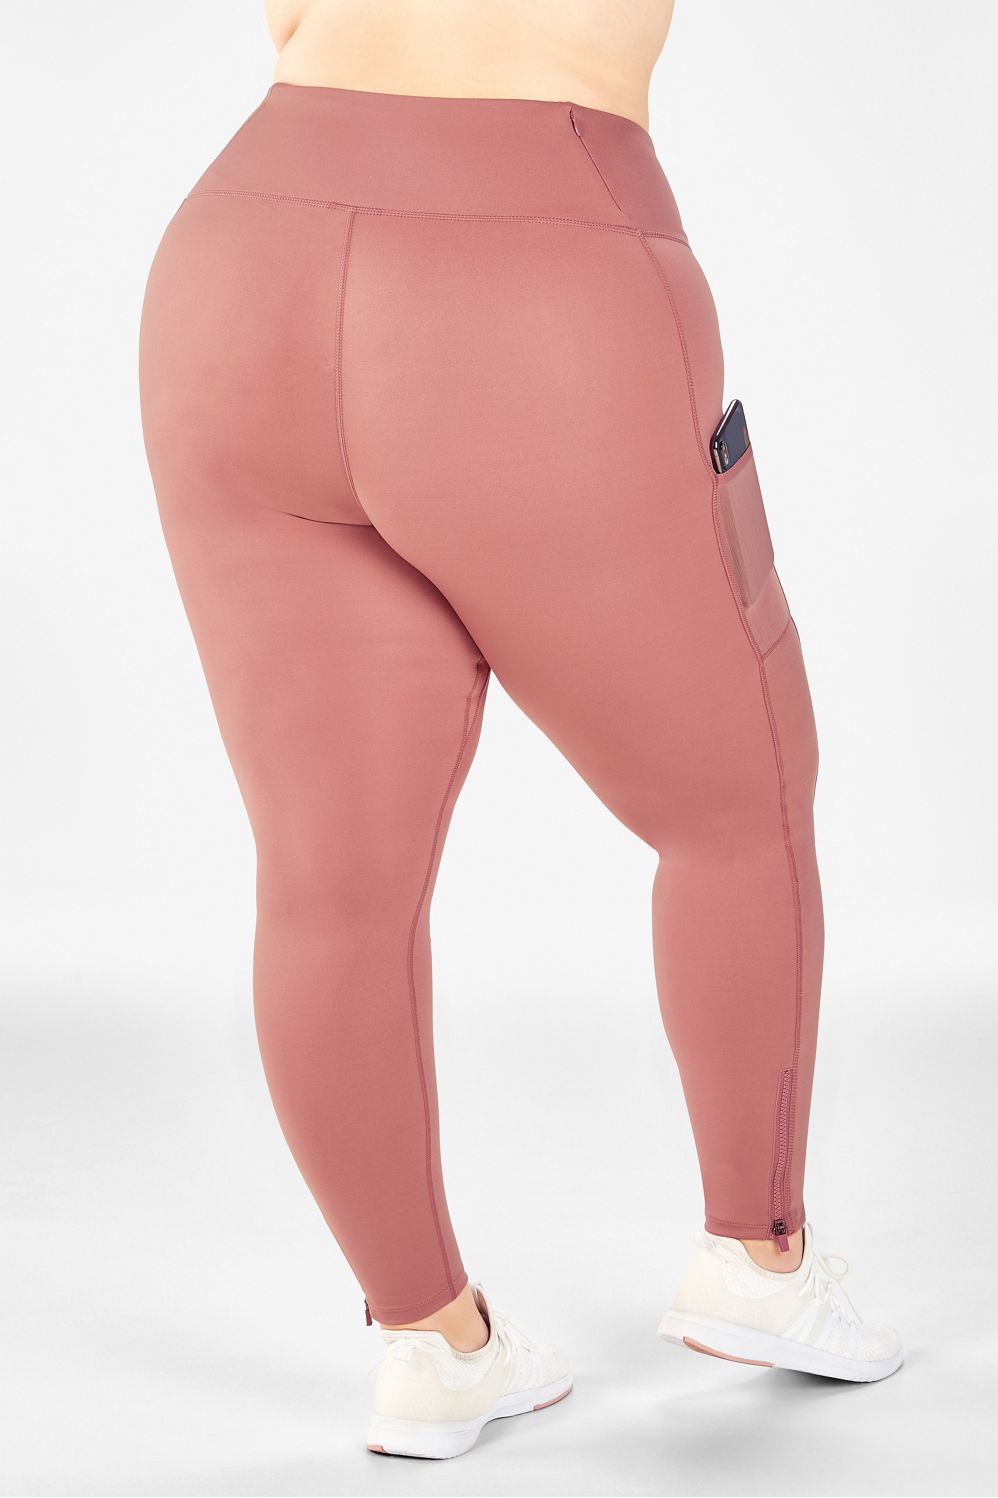 Fabletics Trinity High-Waisted Utility Legging in Orchid Smoke Size Small